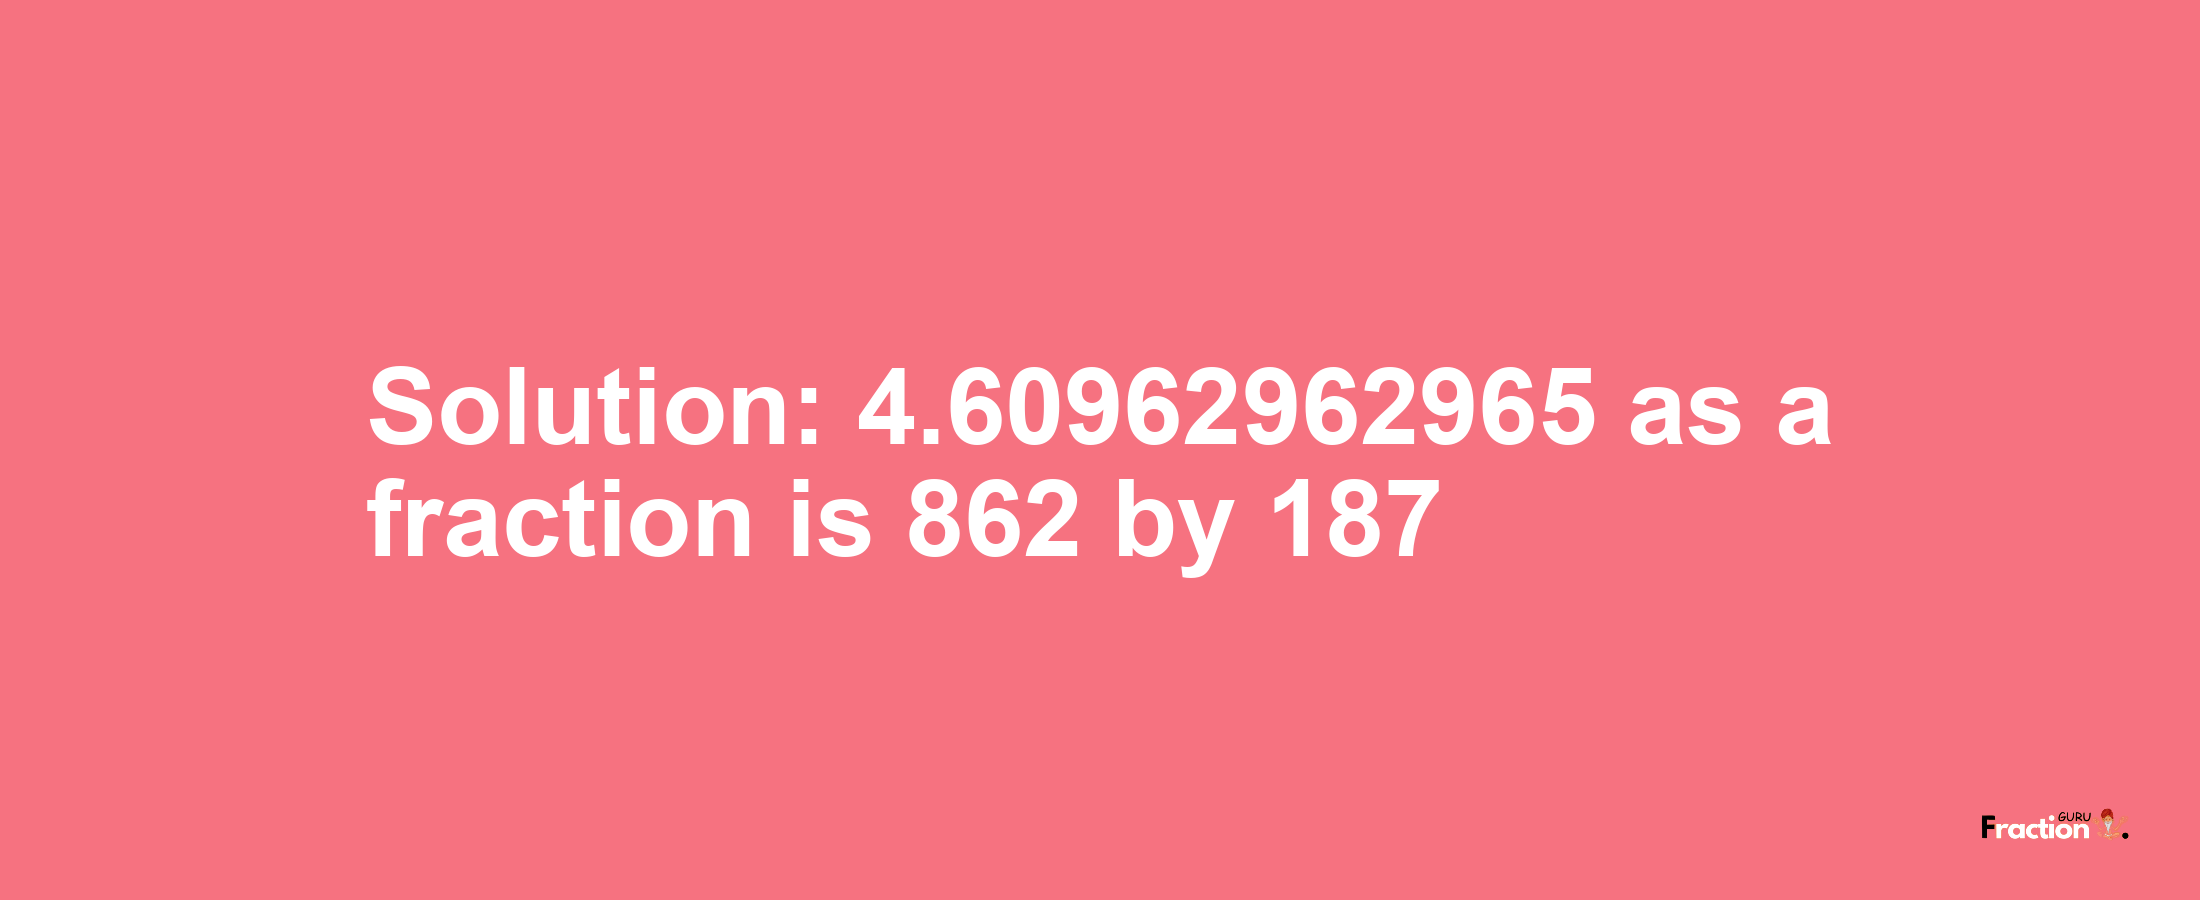 Solution:4.60962962965 as a fraction is 862/187